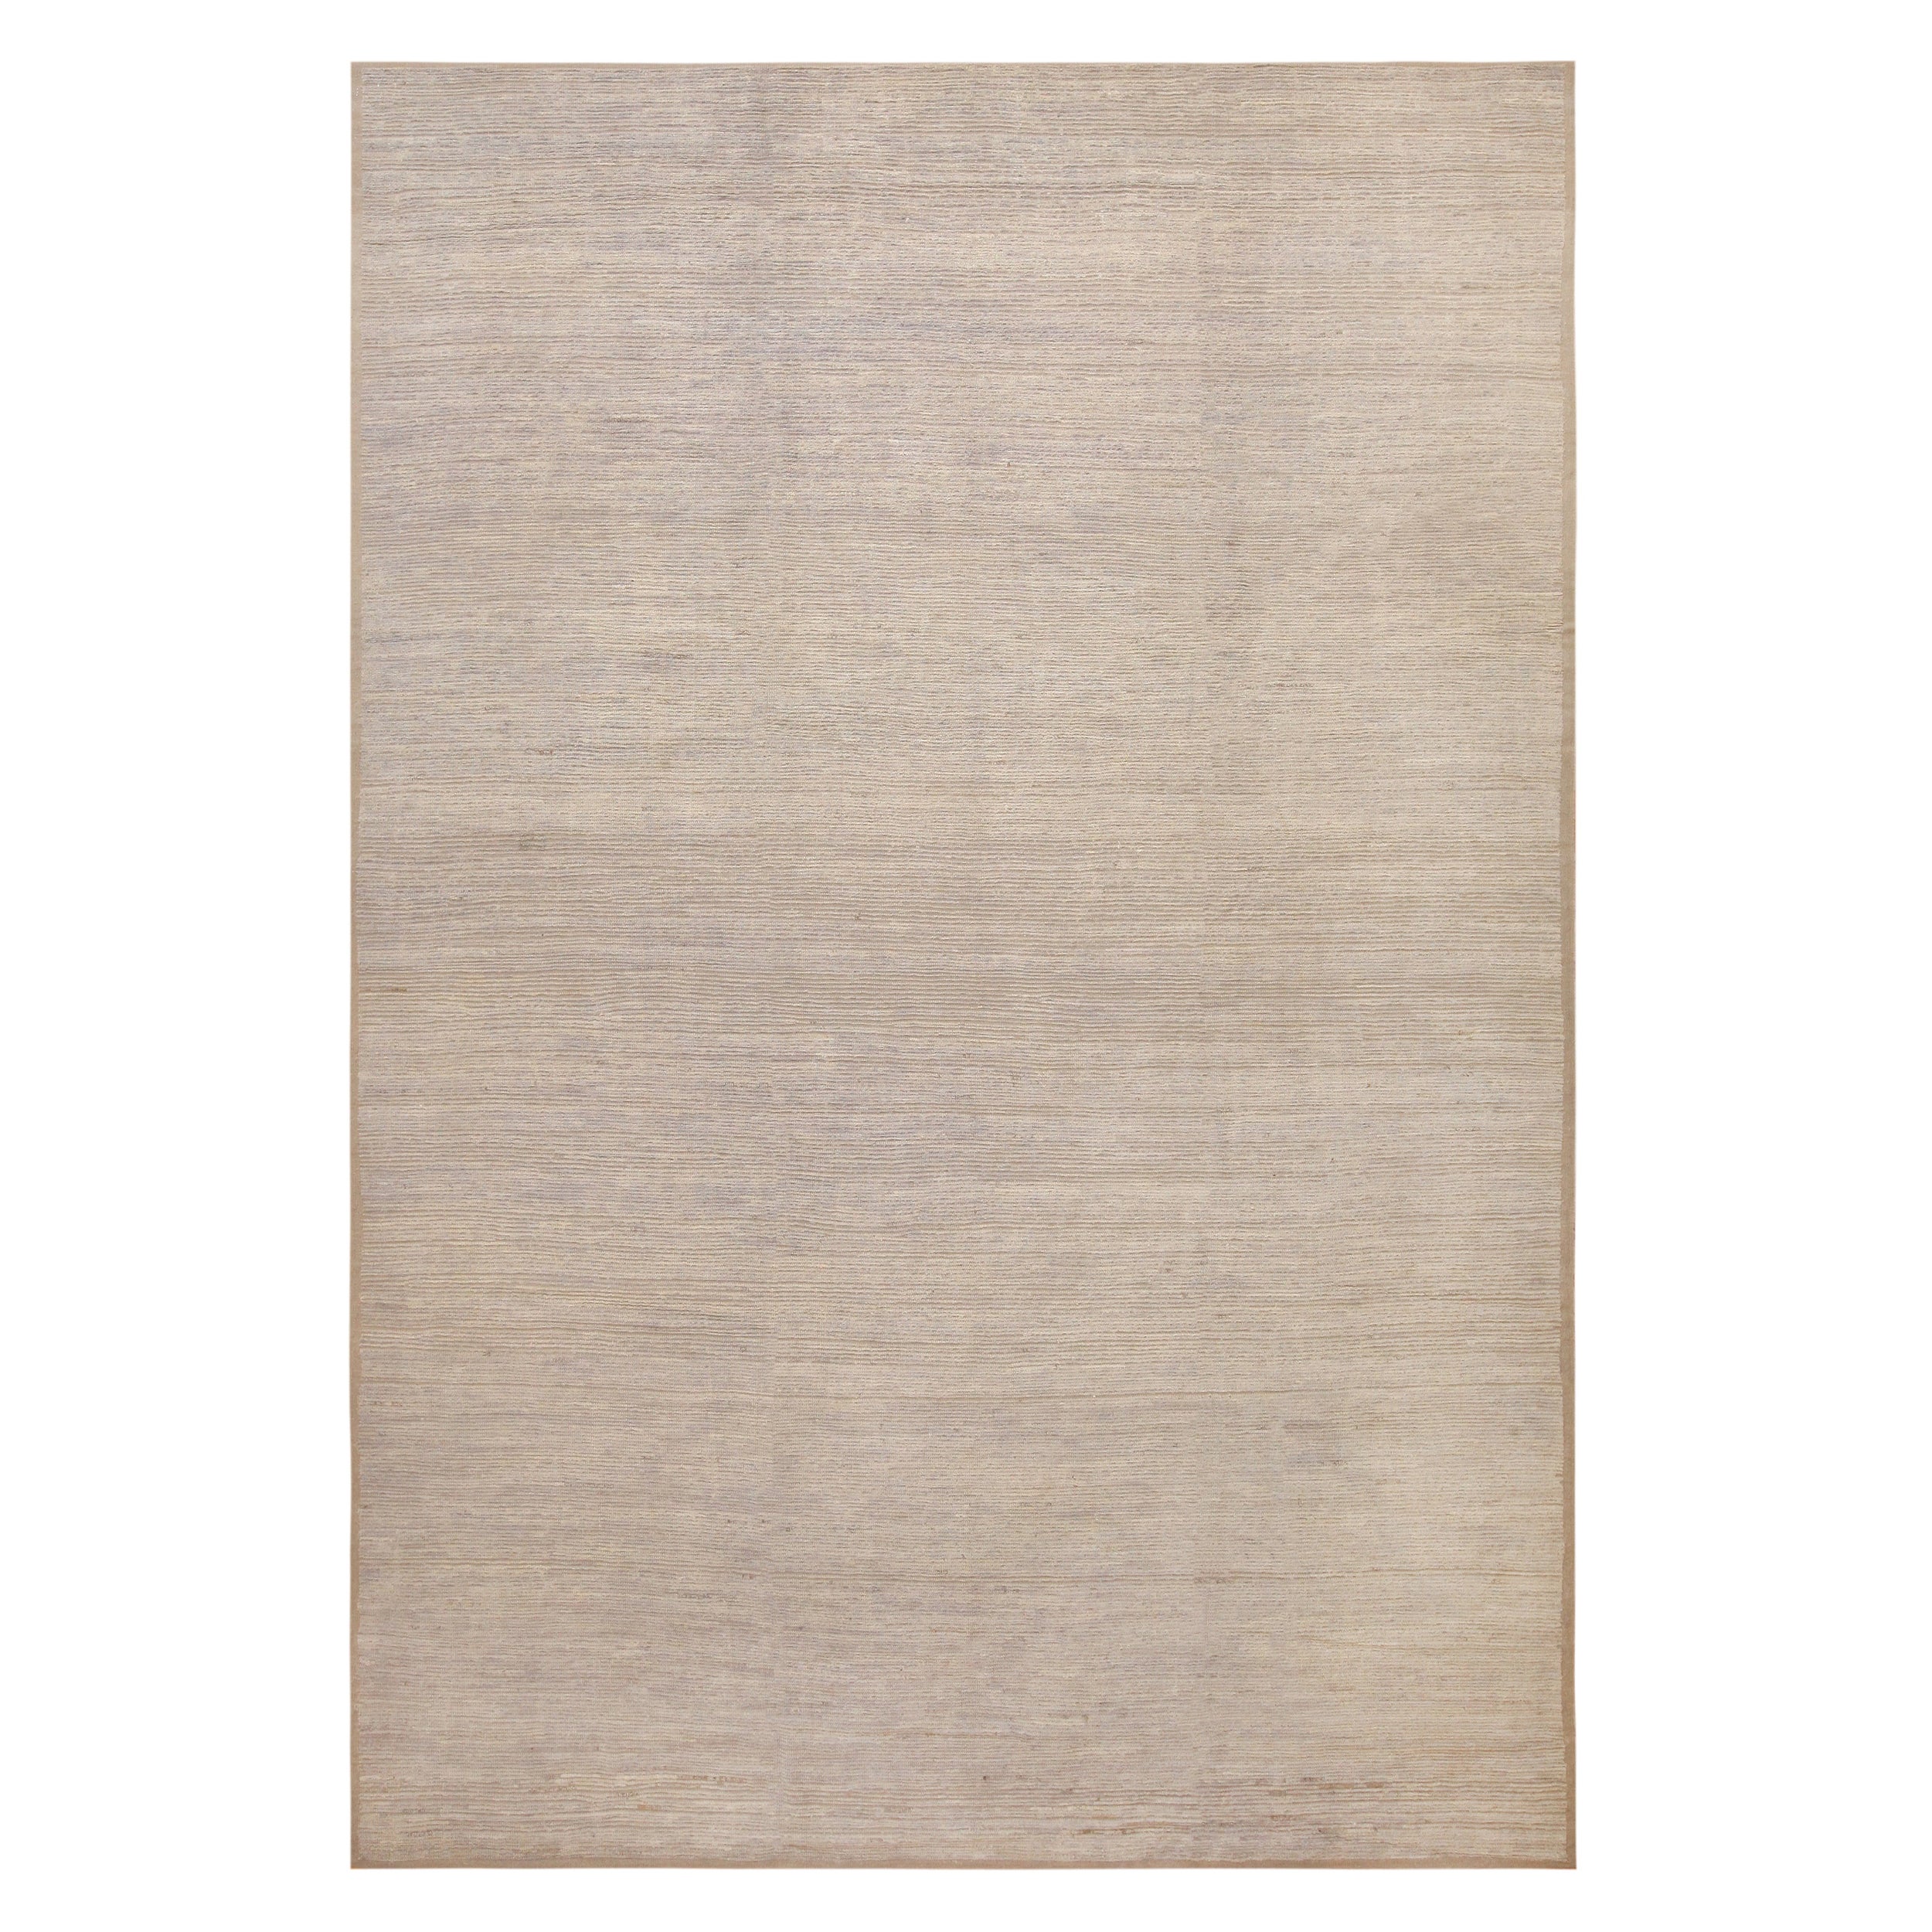 Nazmiyal Collection Gentle Tone Minimalist Modern Rug. 9 ft 6 in x 13 ft 10 in For Sale